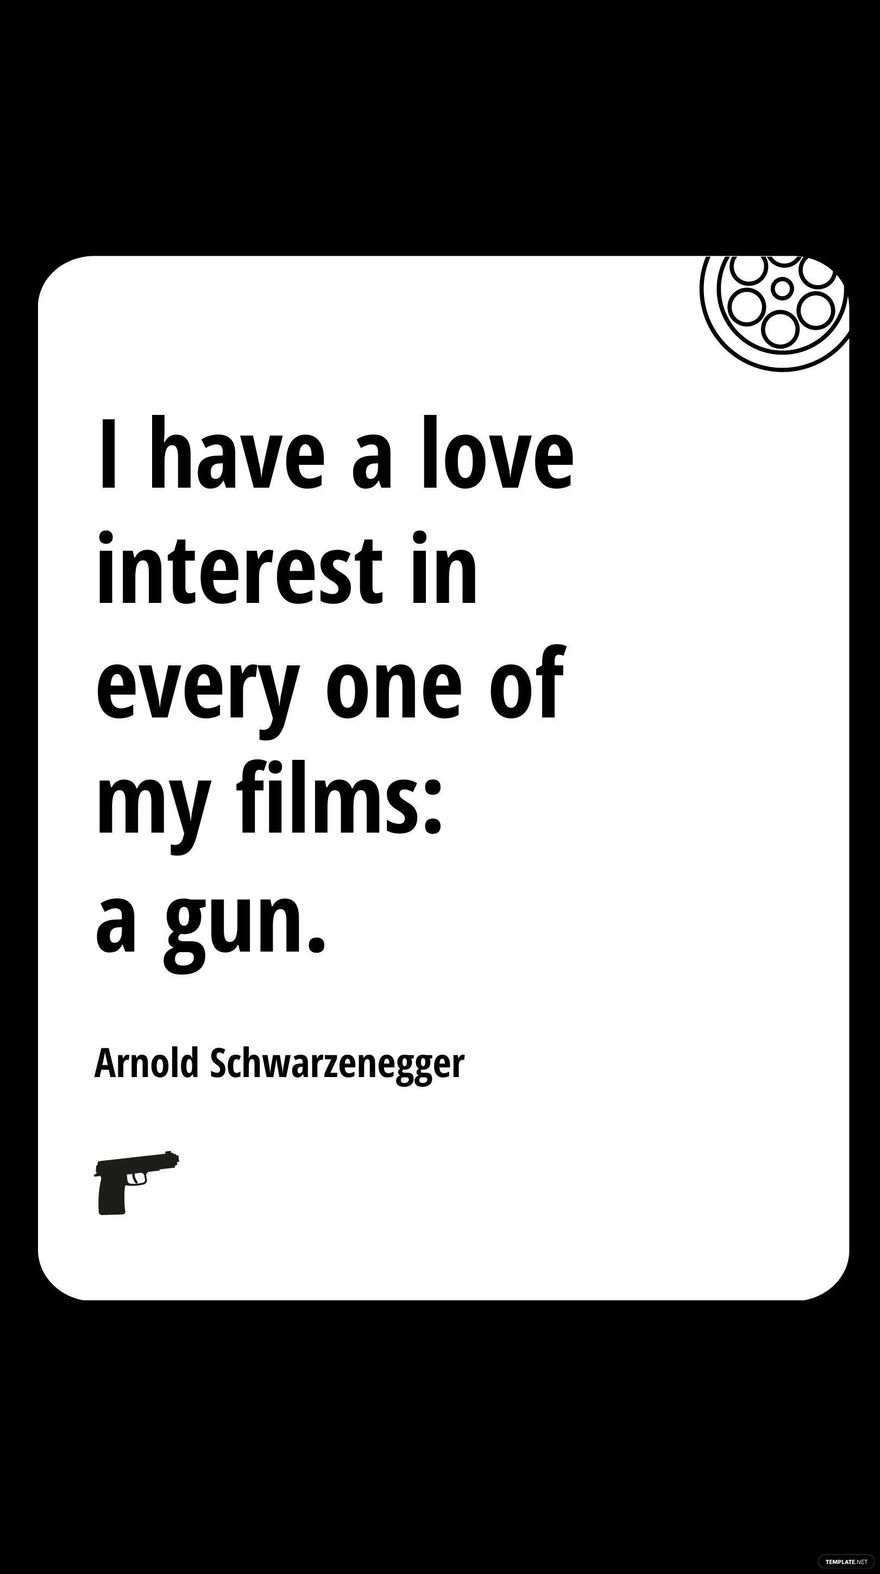 Arnold Schwarzenegger - I have a love interest in every one of my films: a gun. in JPG